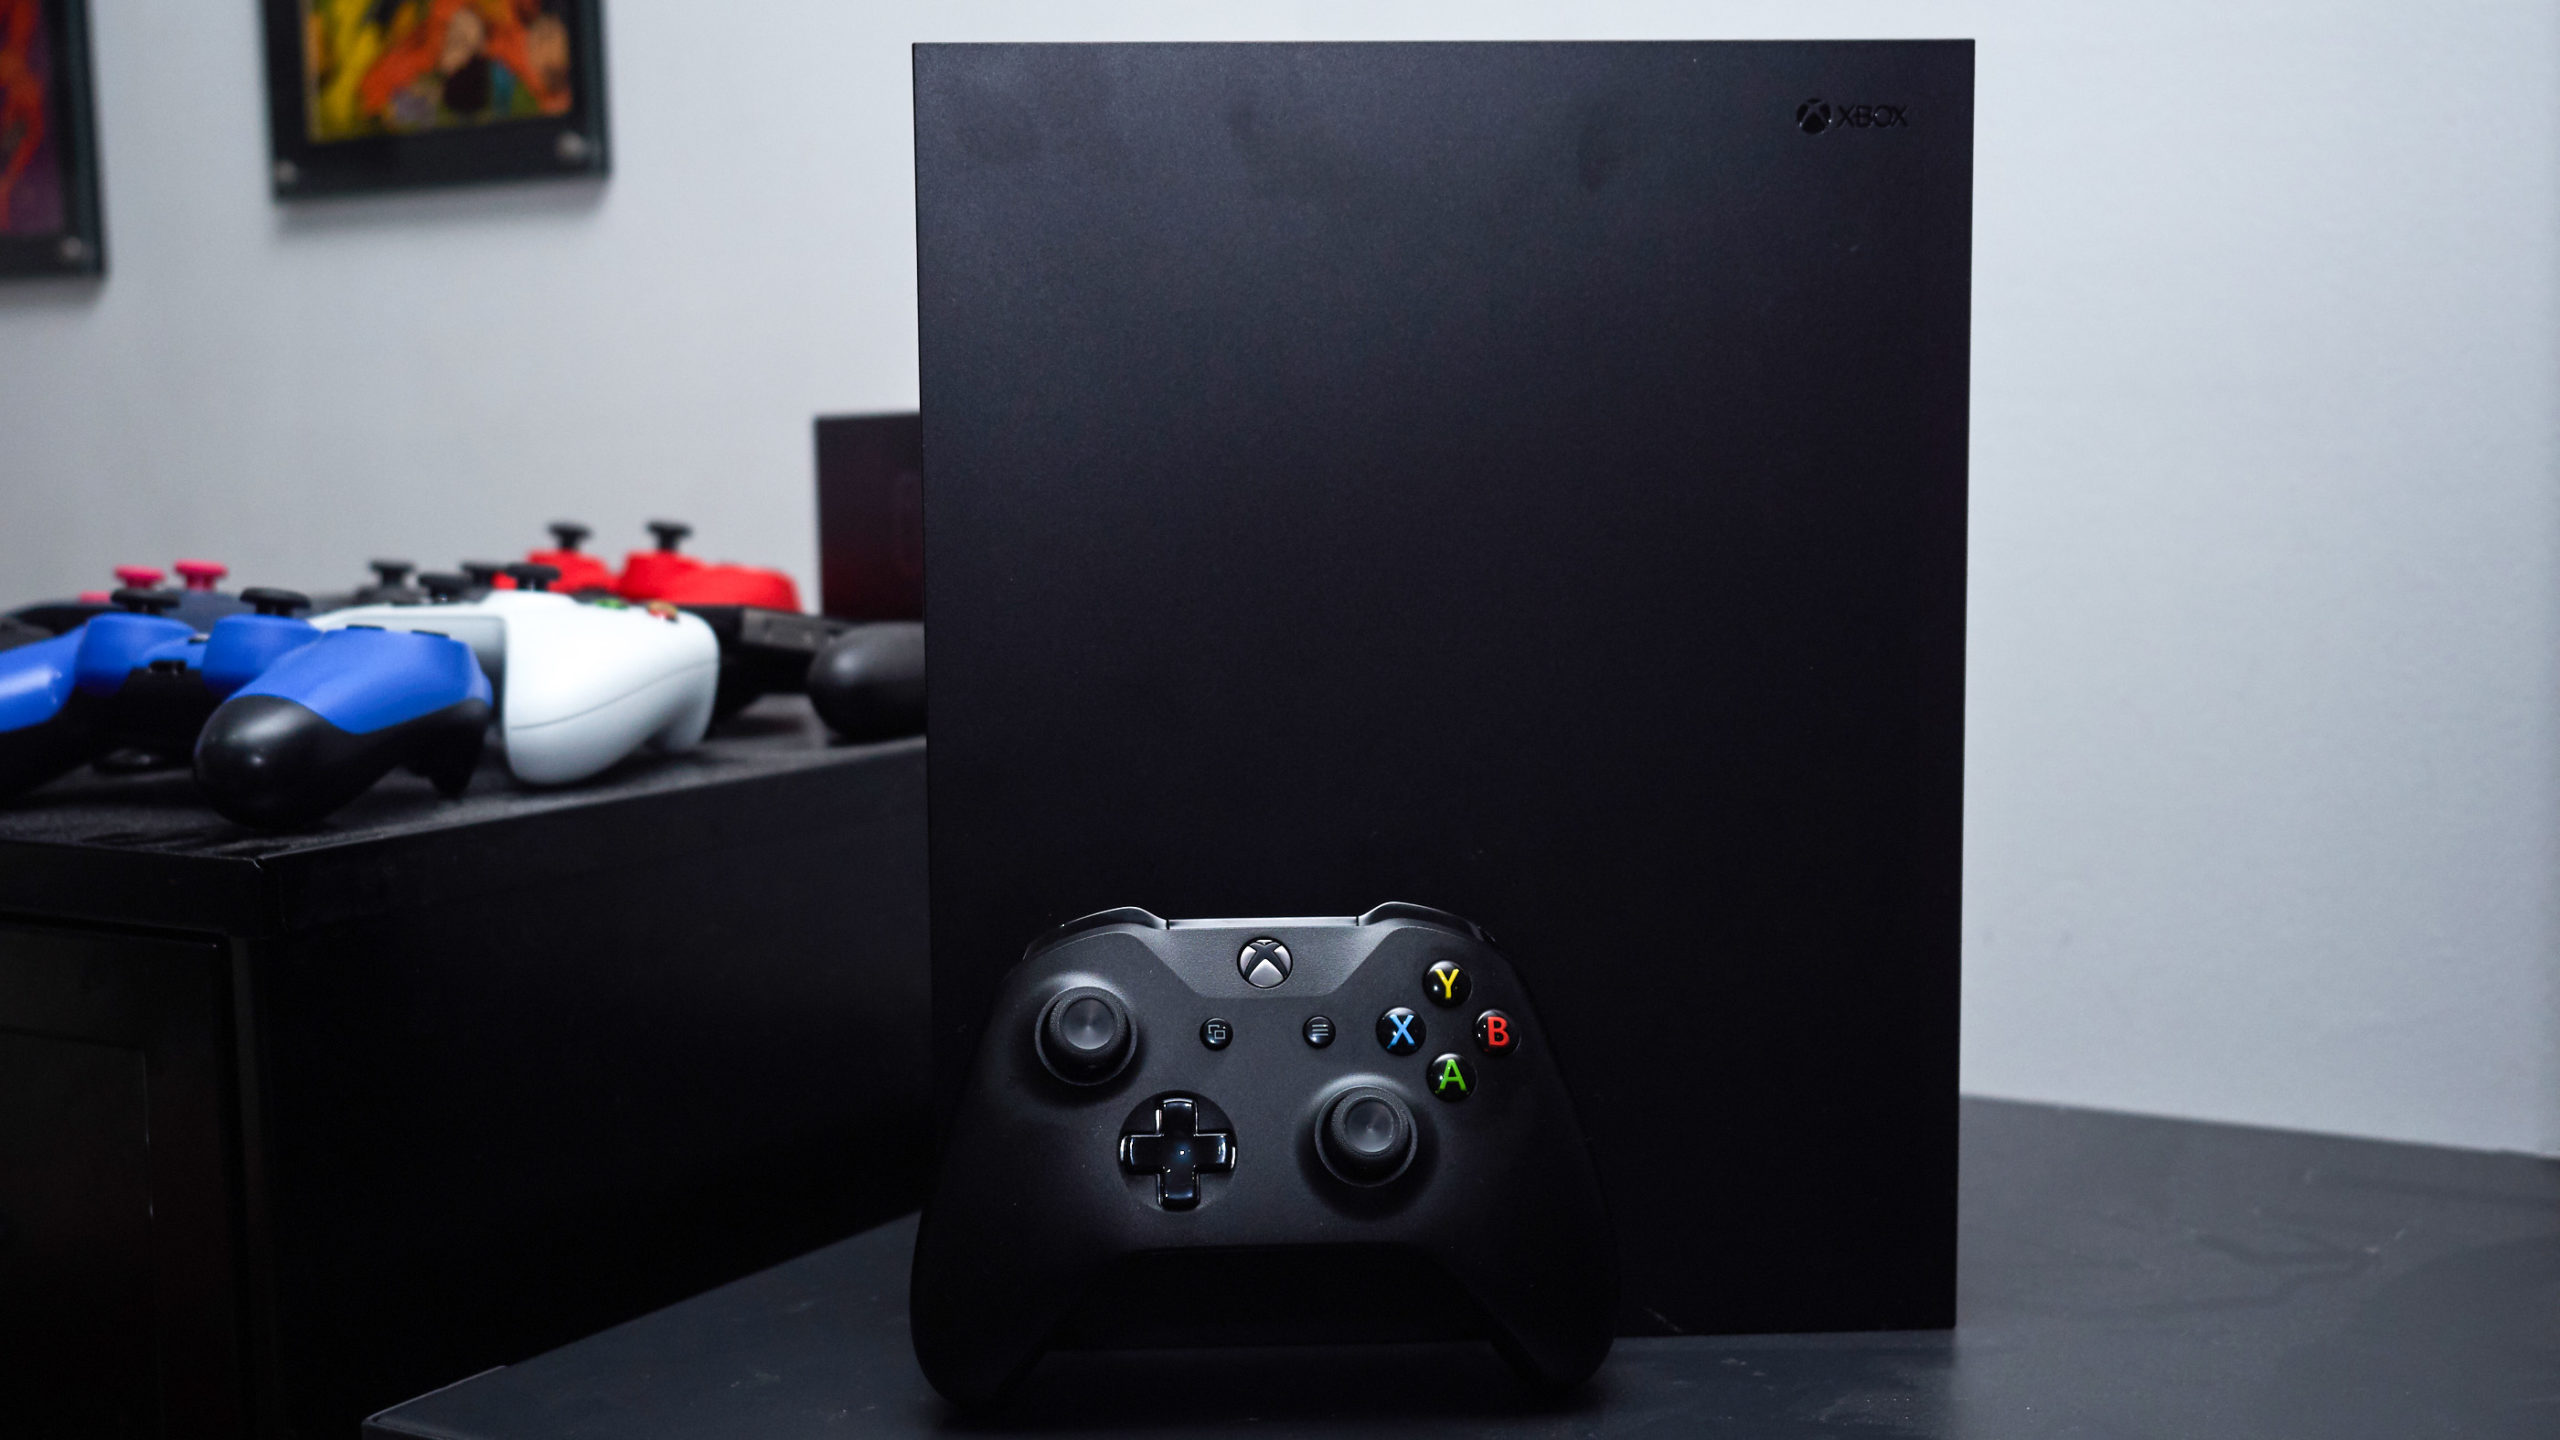 The Xbox One X: The Gizmodo Review